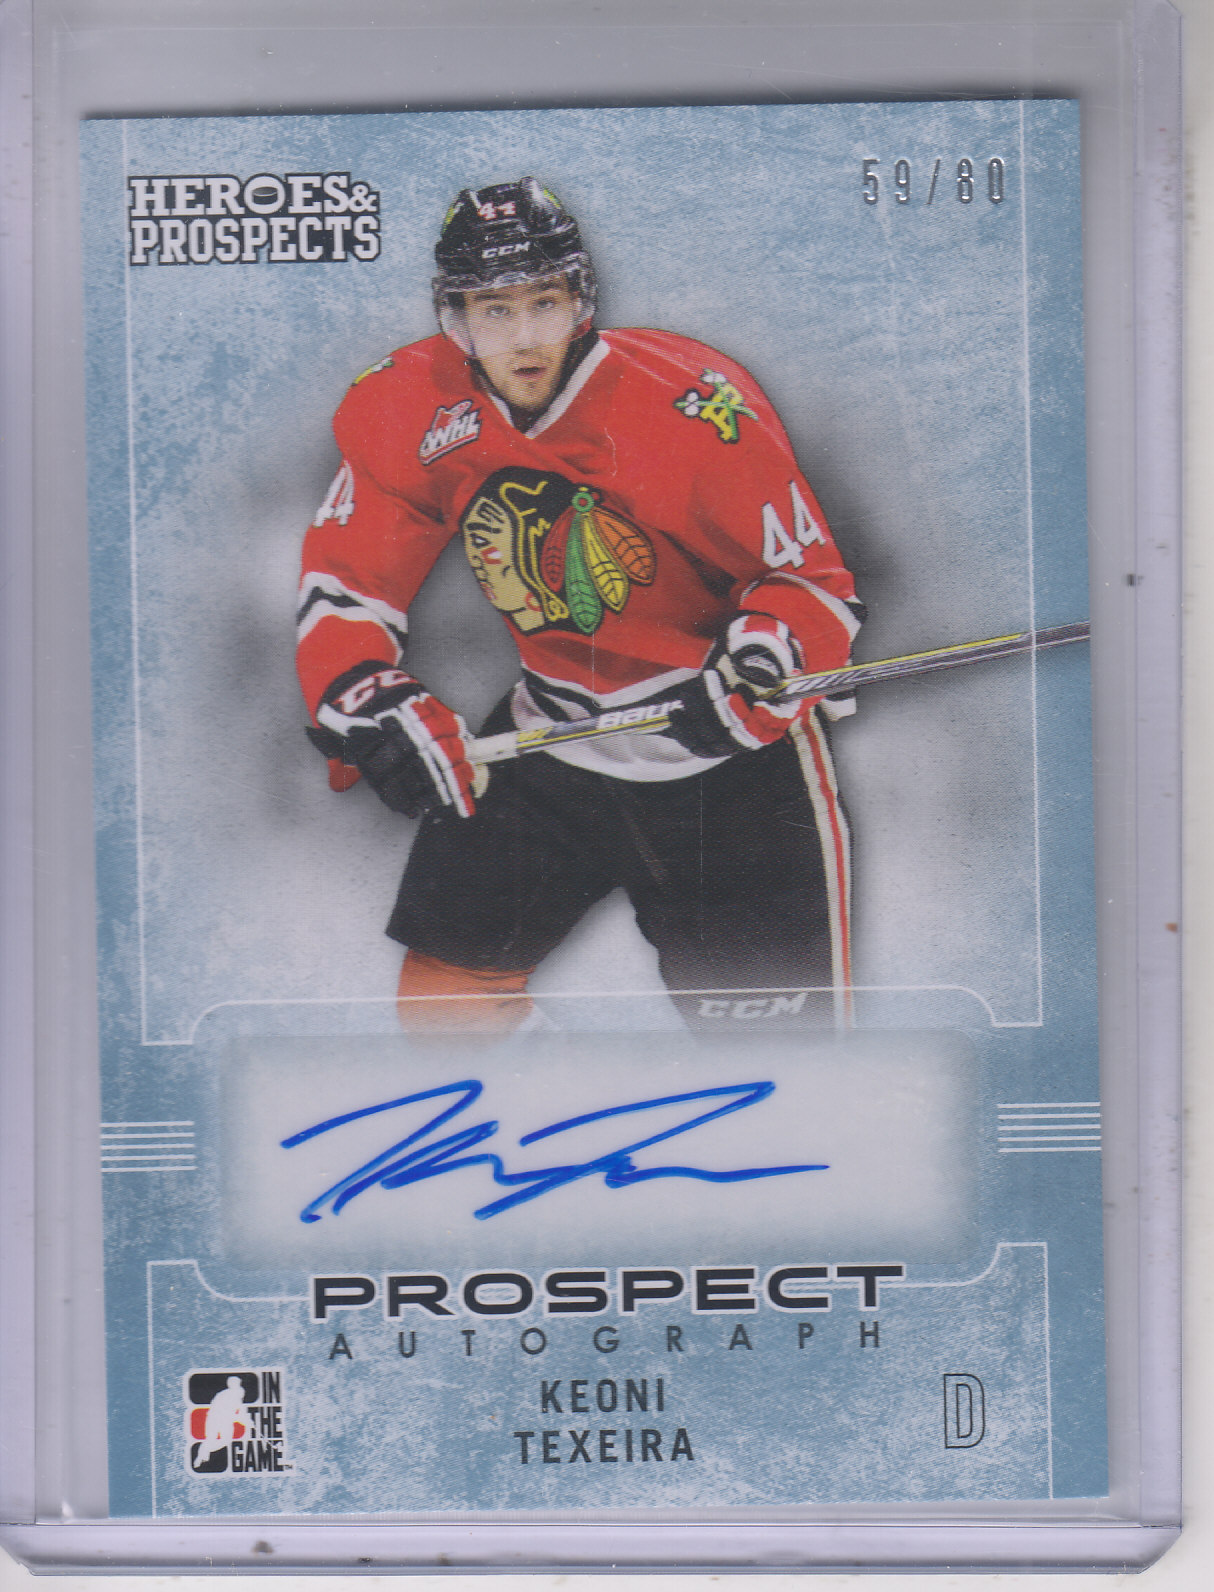 2014-15 ITG Heroes and Prospects Prospect Autographs #47 Keoni Texeira/80